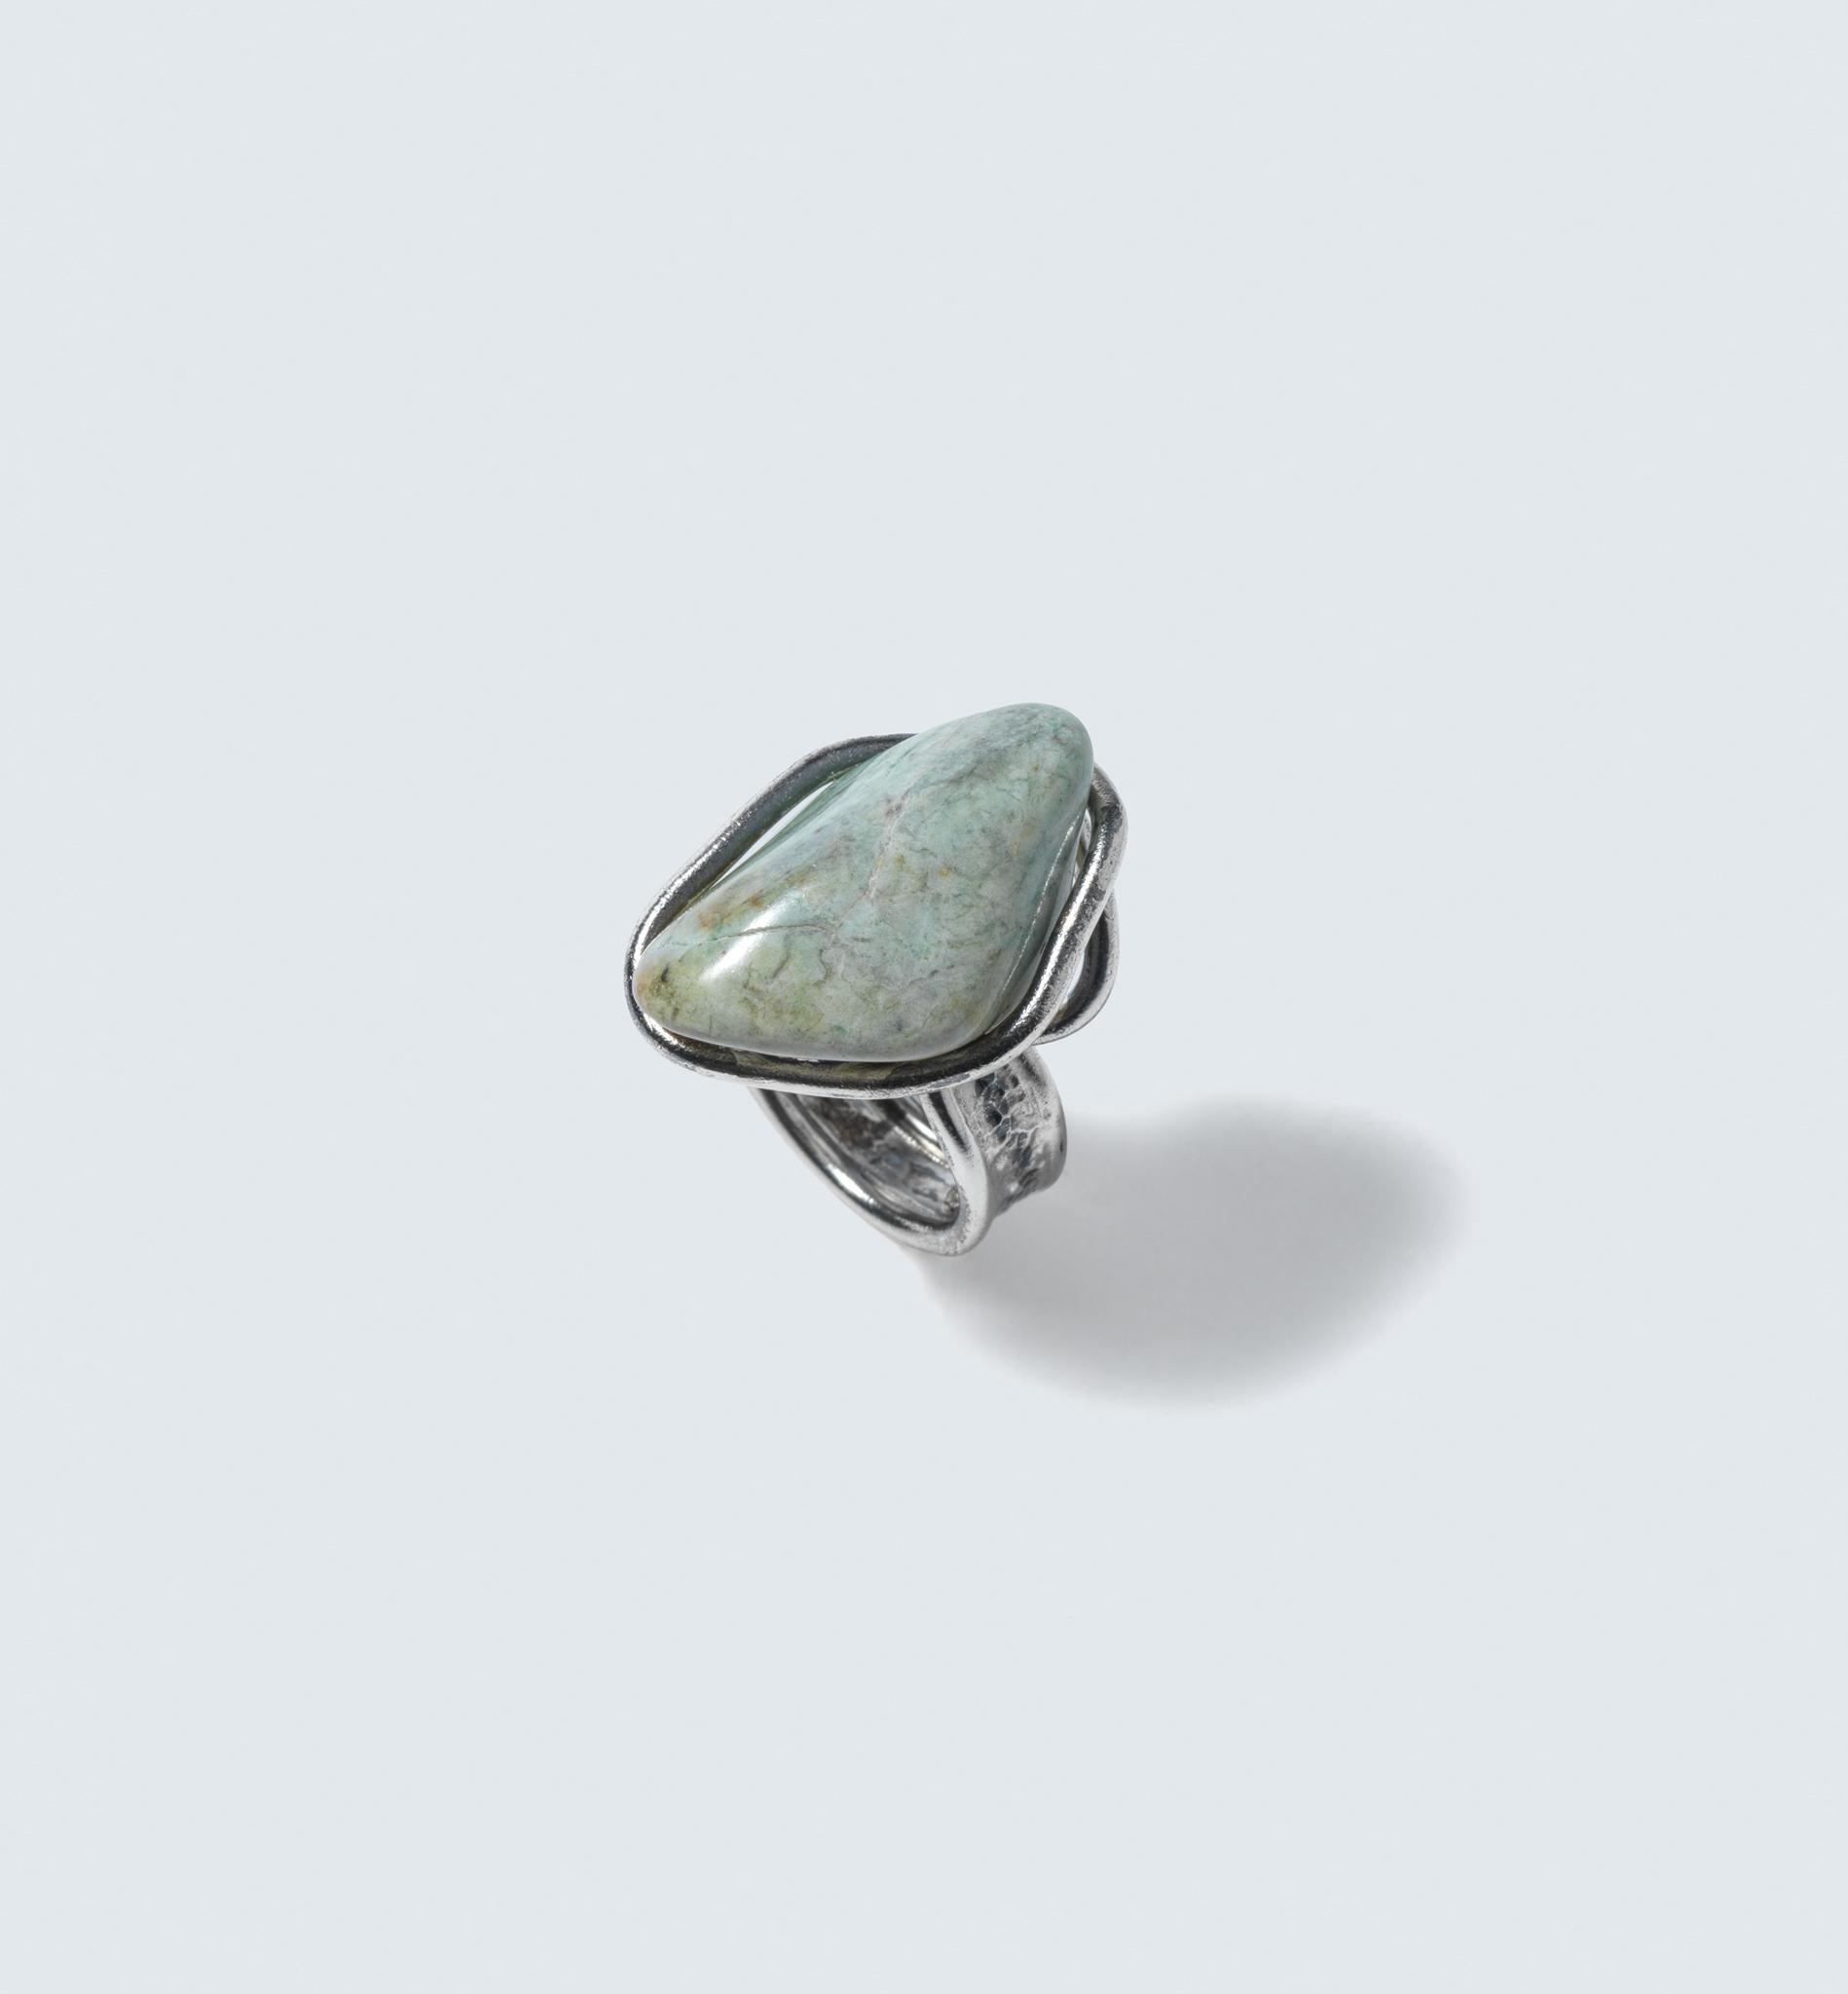 This is a unique ring that features a large, mint green natural stone set atop a silver band. The stone is secured with an unconventional setting, where a silver wire is wrapped around it, creating a distinctive and artistic look. The band of the